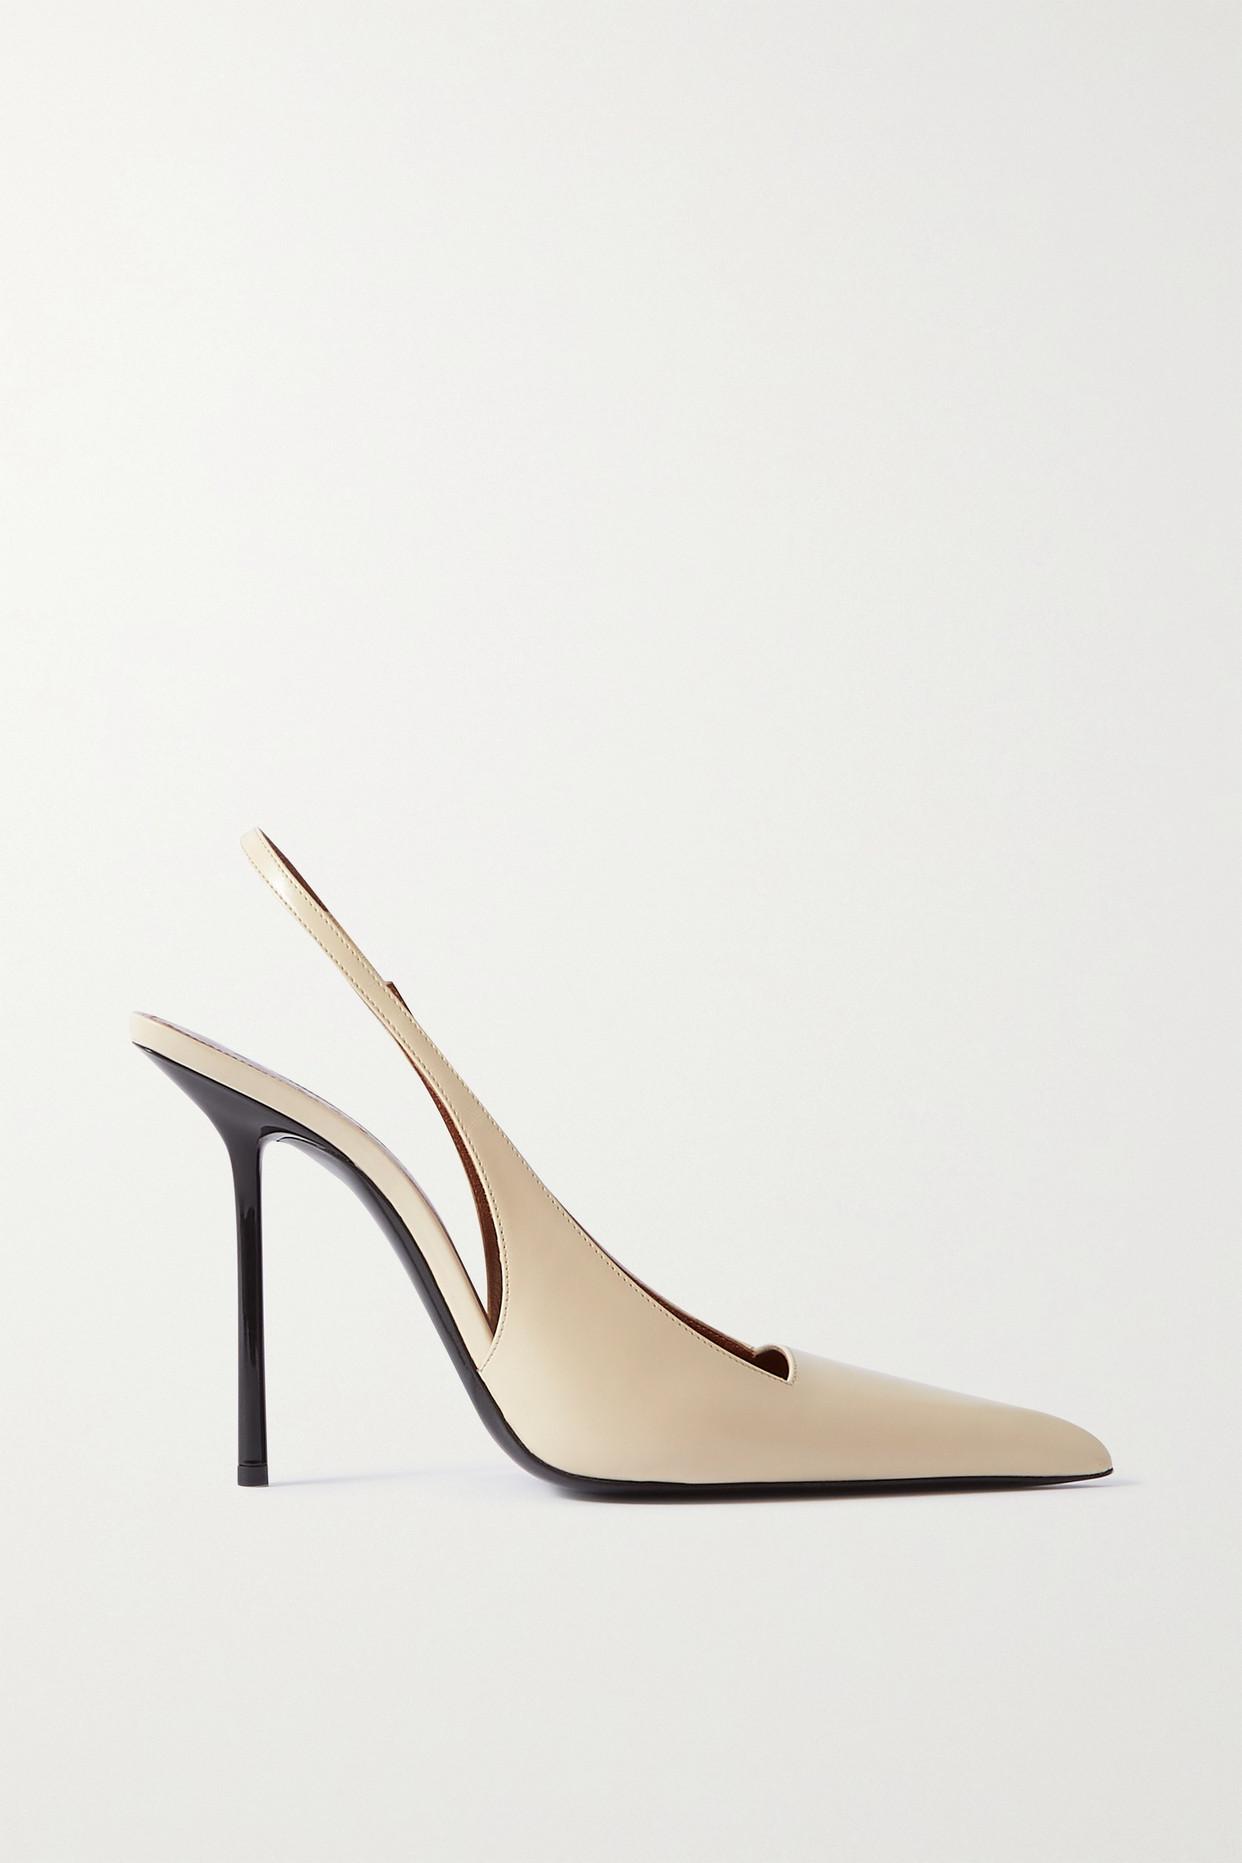 Saint Laurent Kiss Leather Slingback Pumps in White | Lyst